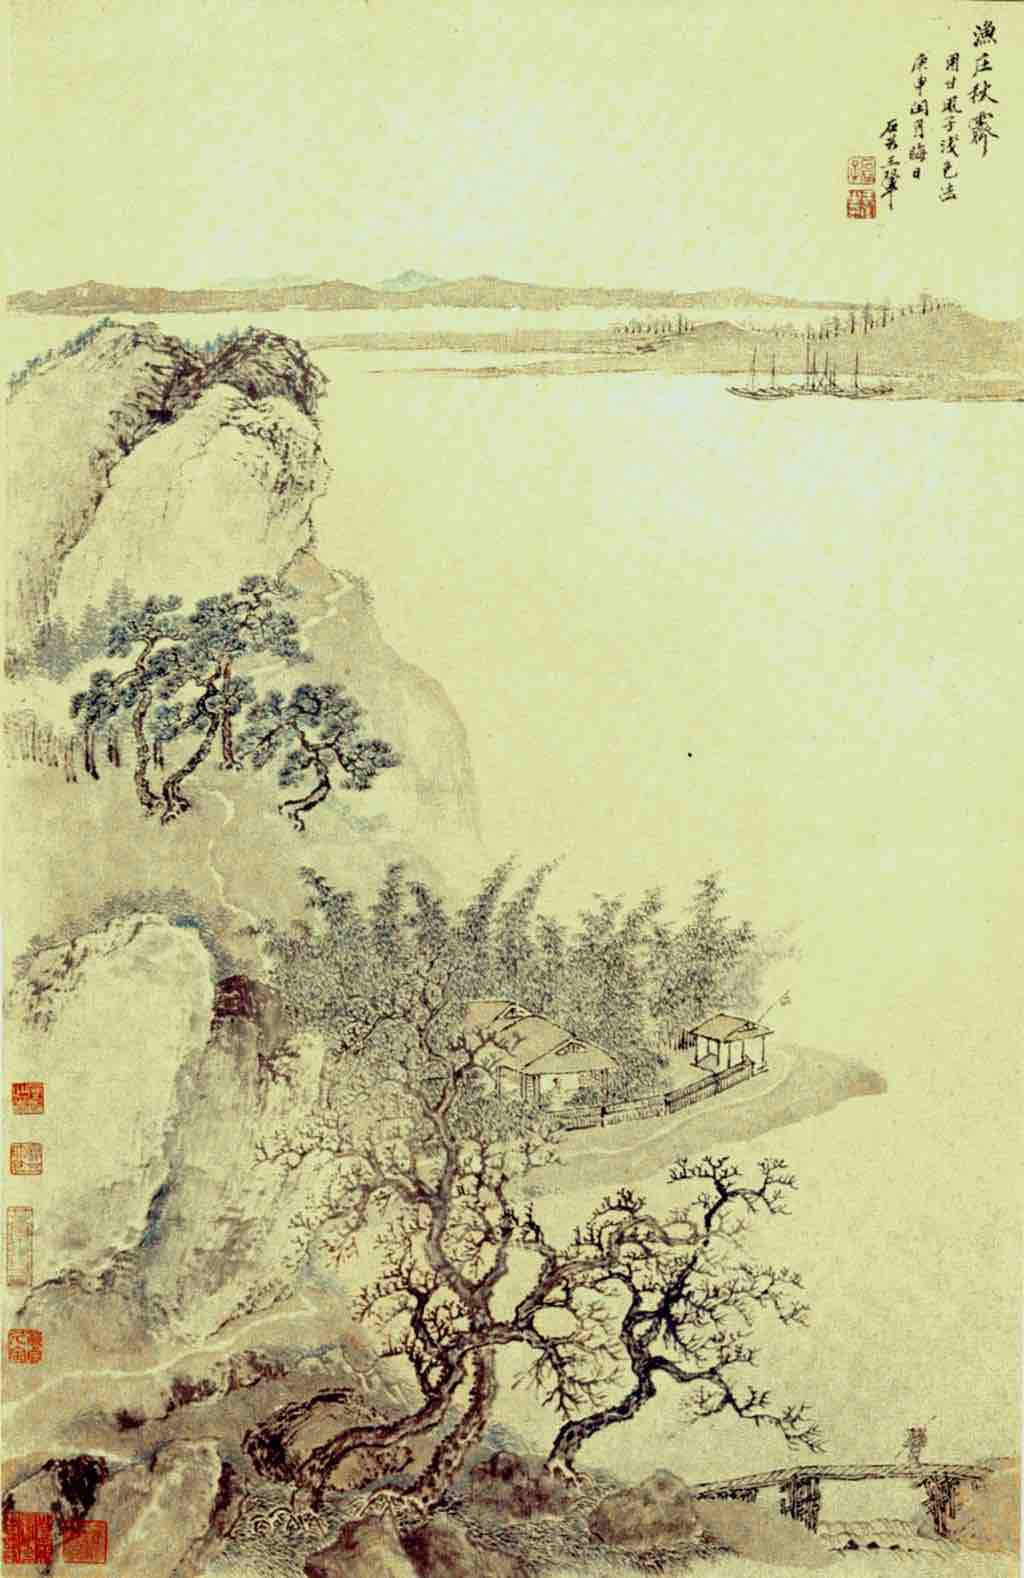 Wang Hui, Clearing Autum Sky over a Fishing Vilage, hanging scroll, ink and light colors on paper (1680)